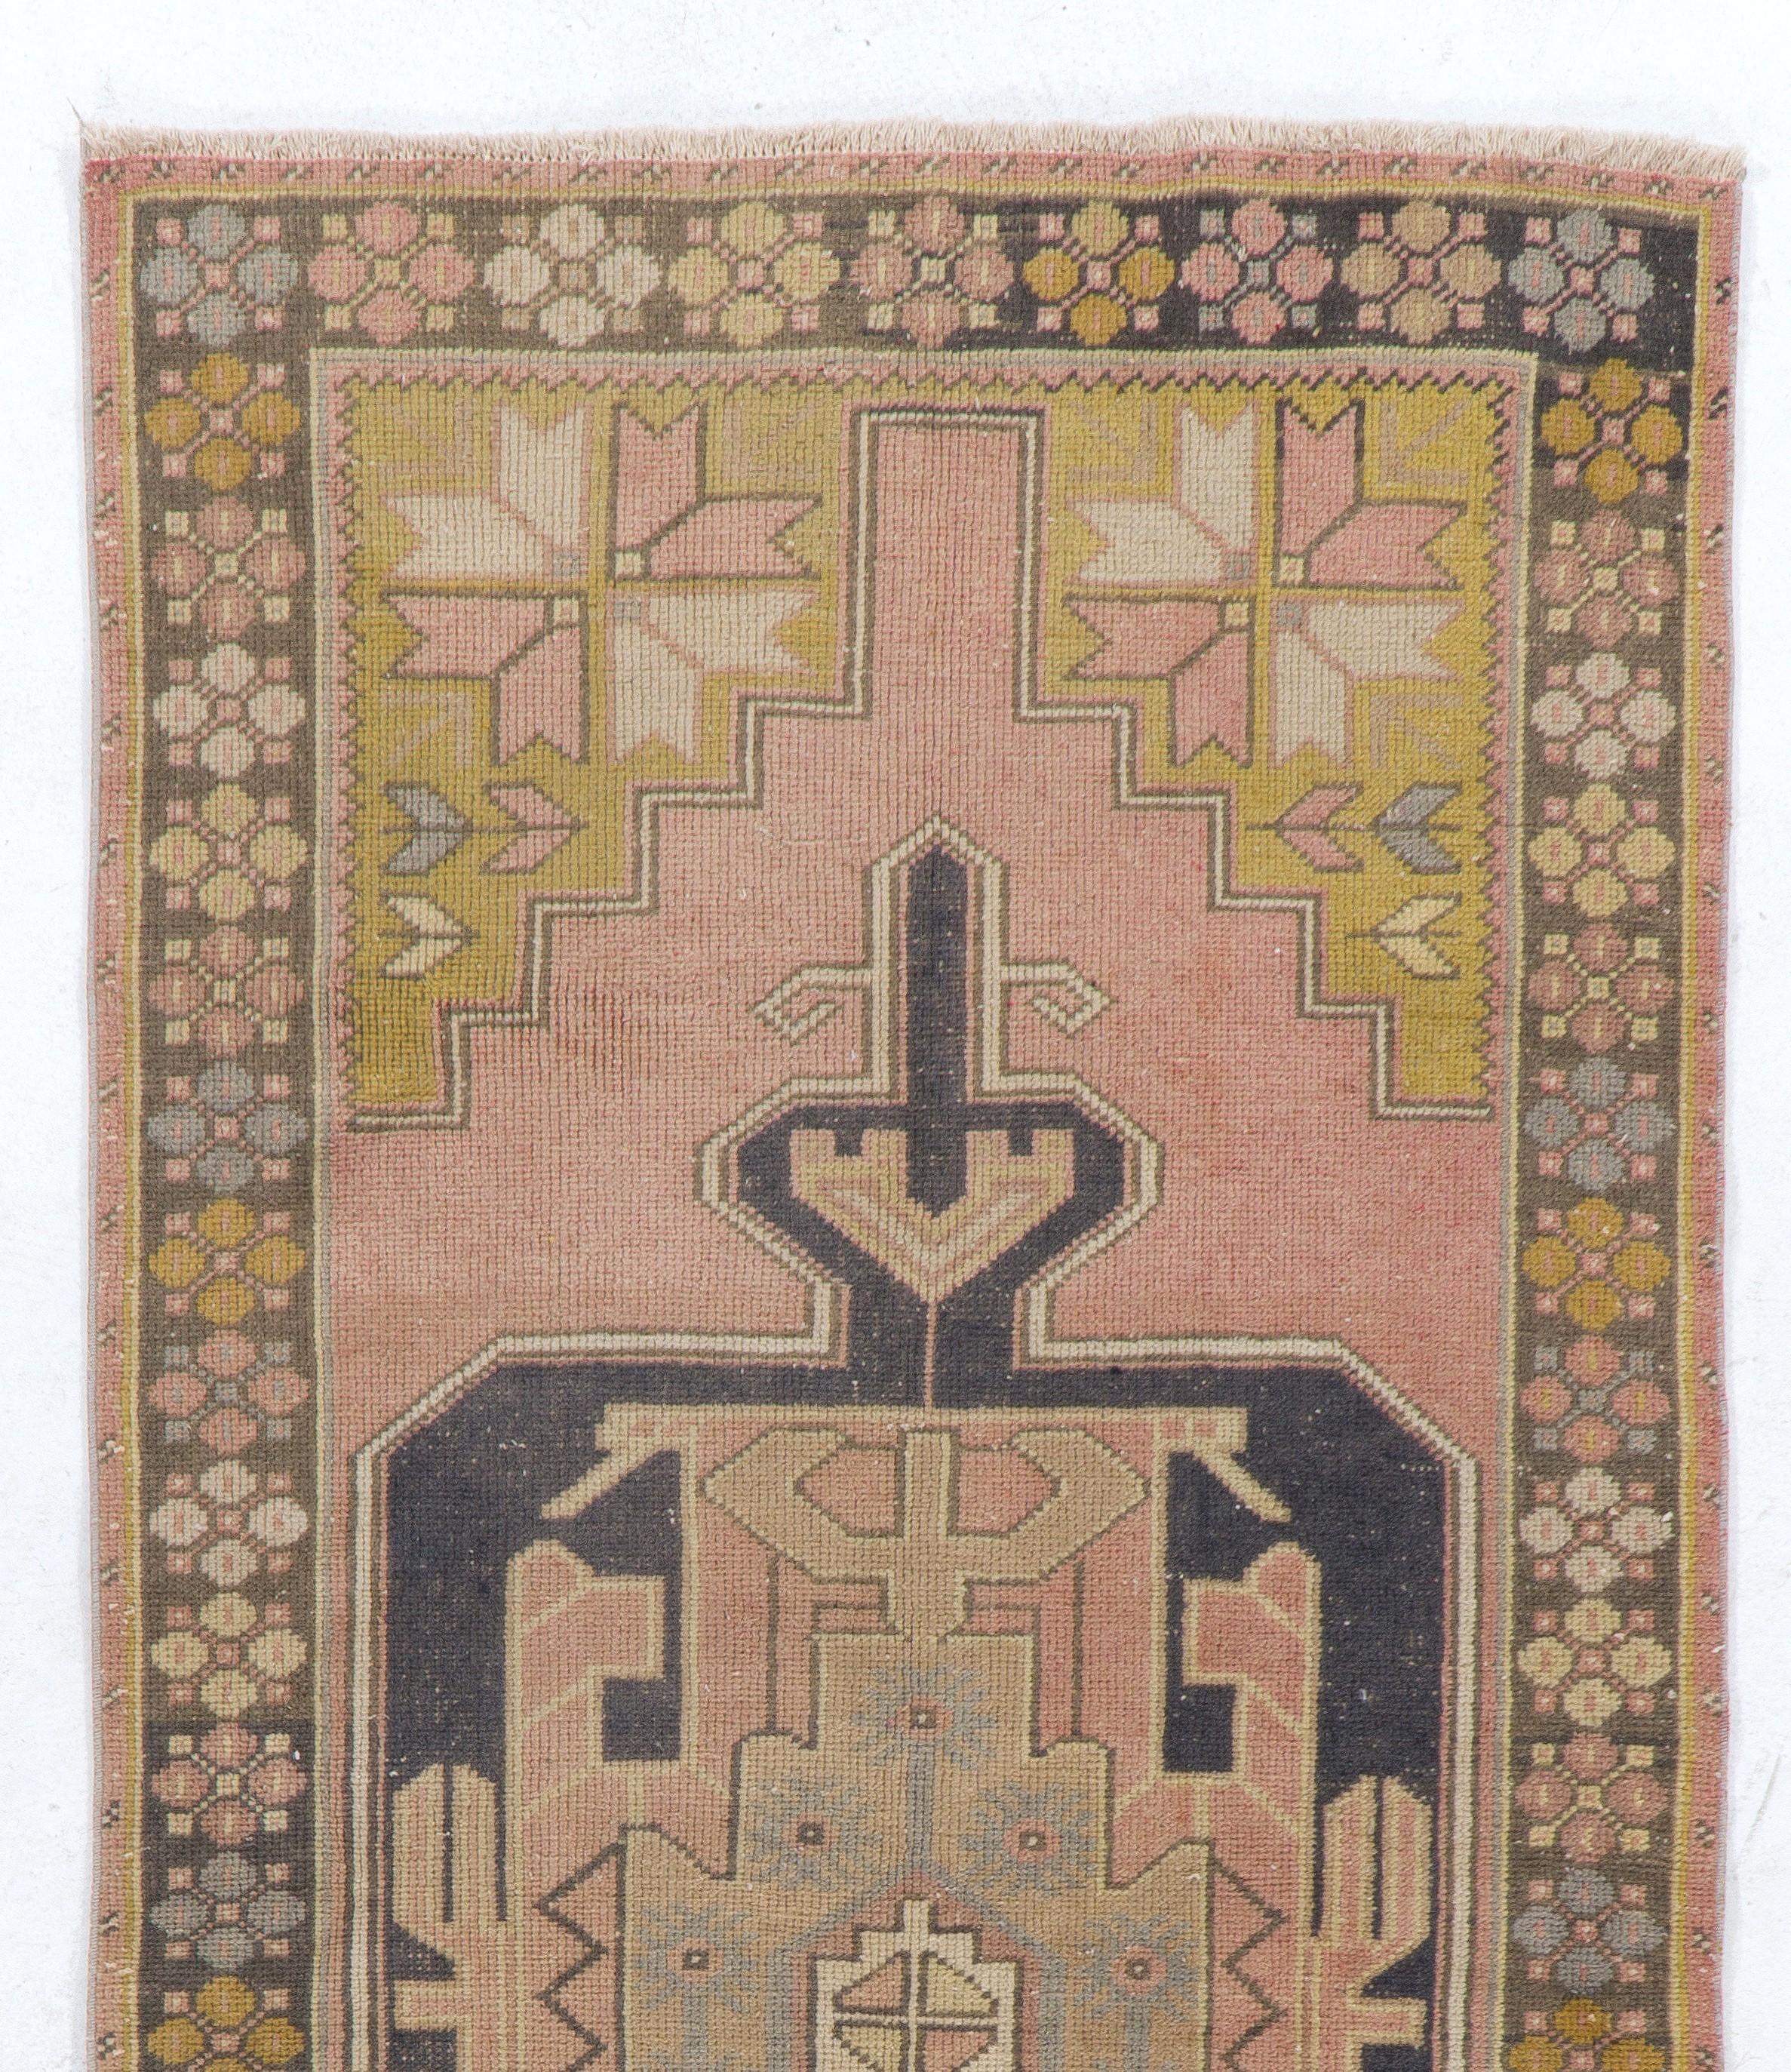 A finely hand knotted vintage Central Anatolian rug with a Classic garden design with flowers, spandrels, blossoms, leaves and branches.

Wool pile on a tightly woven strong cotton foundation, very good condition.

It has been washed professionally